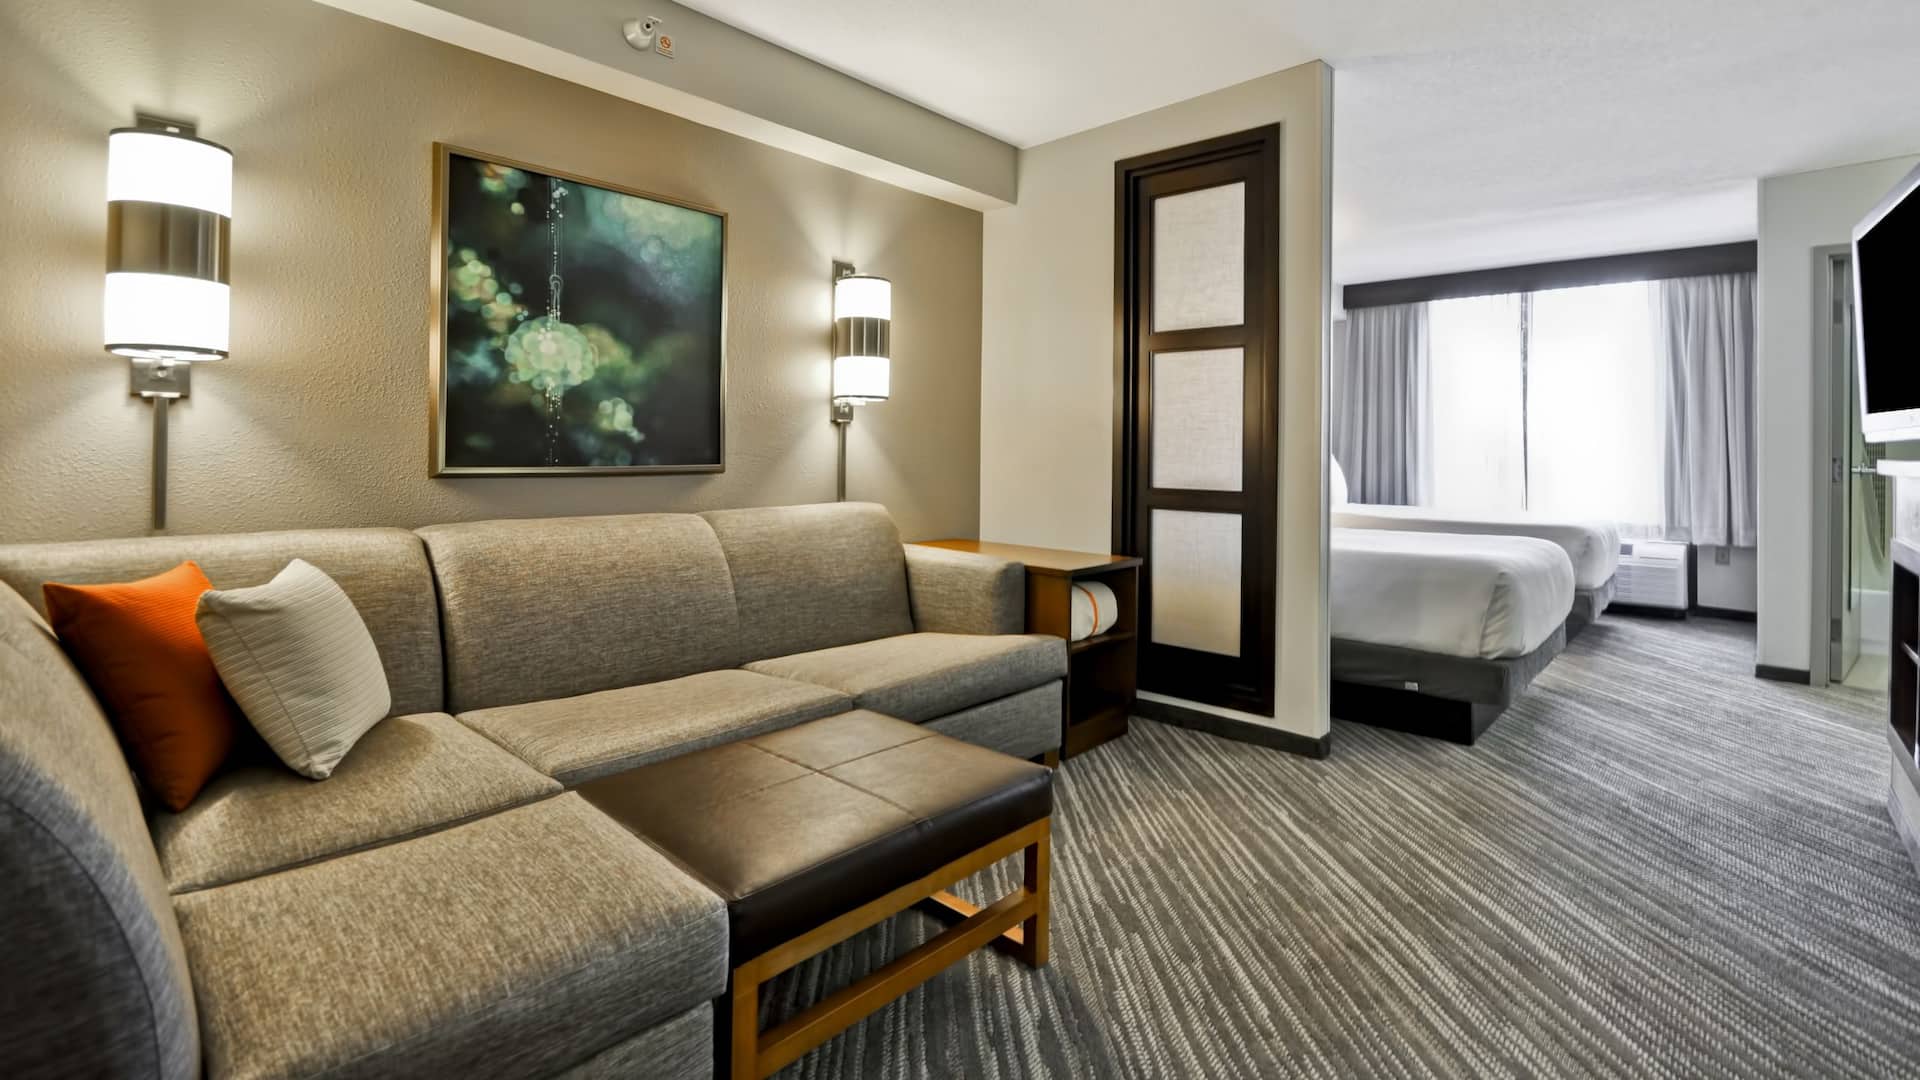 Room at a Minneapolis airport hotel that offers shuttle service